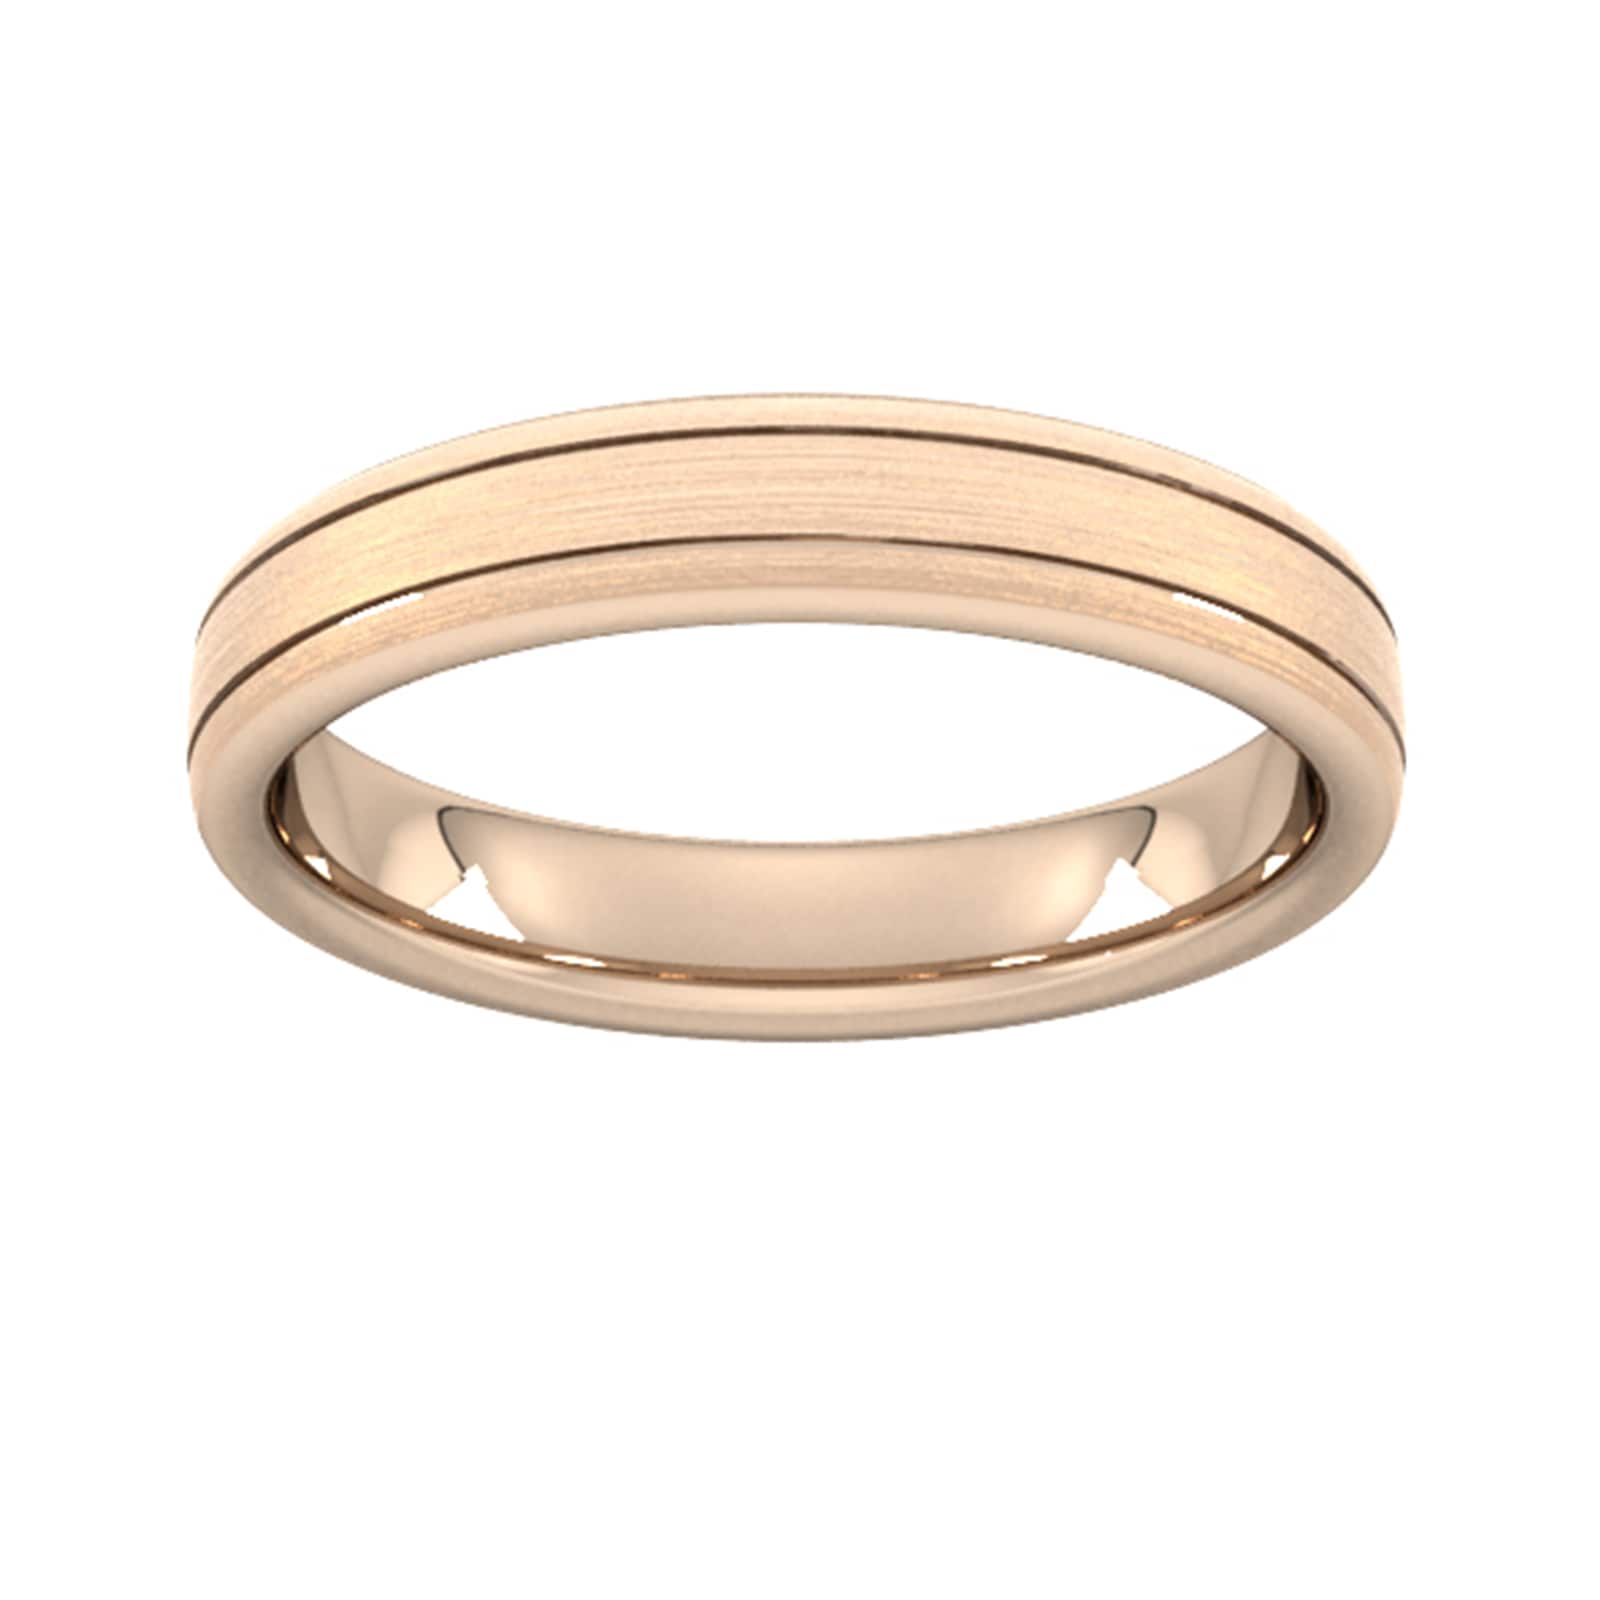 4mm Traditional Court Standard Matt Finish With Double Grooves Wedding Ring In 18 Carat Rose Gold - Ring Size R